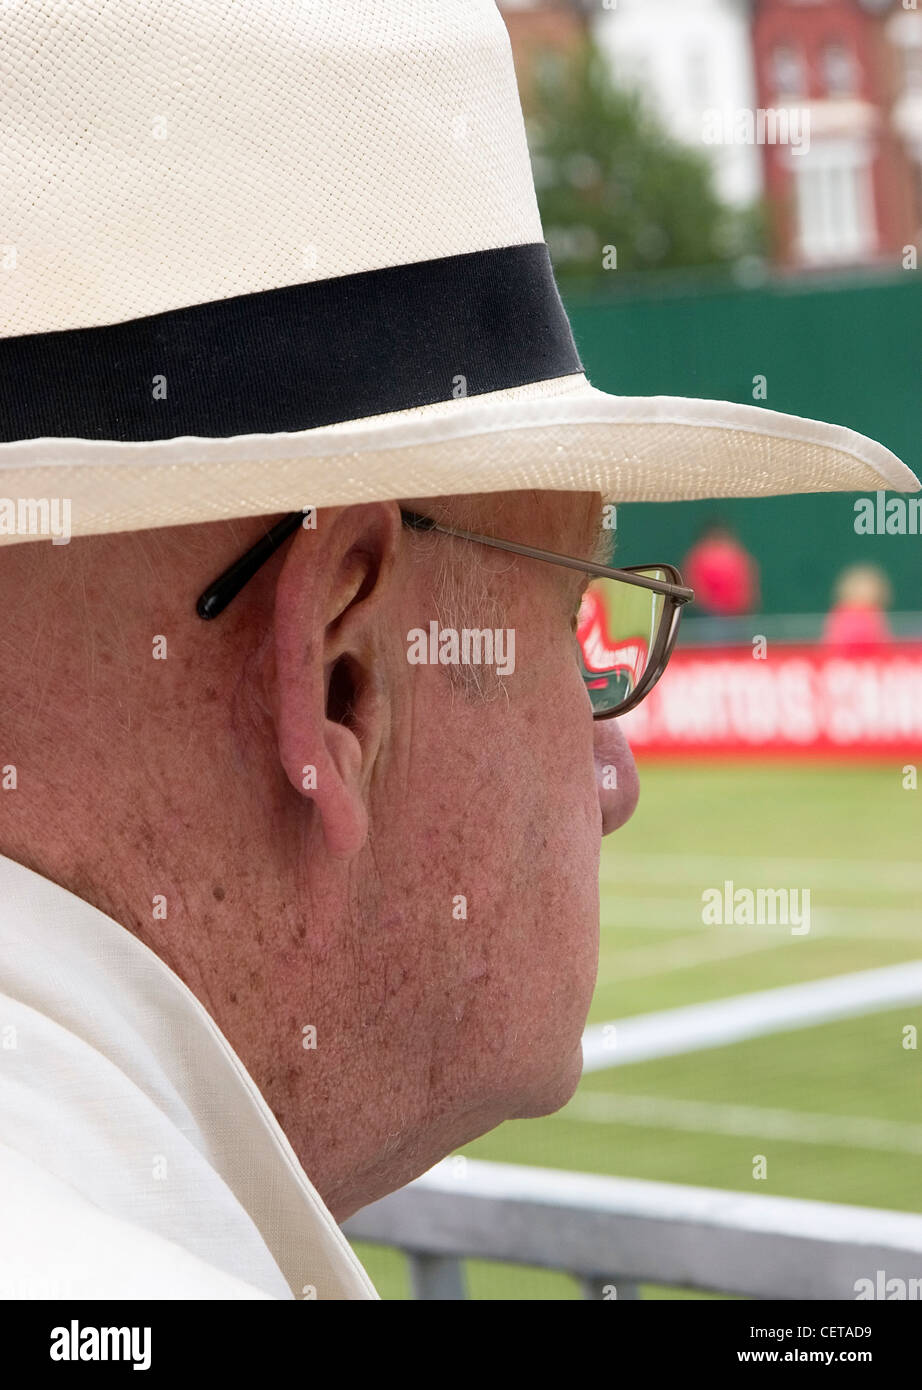 Tennis spectator at Queen's Club in London. Stock Photo